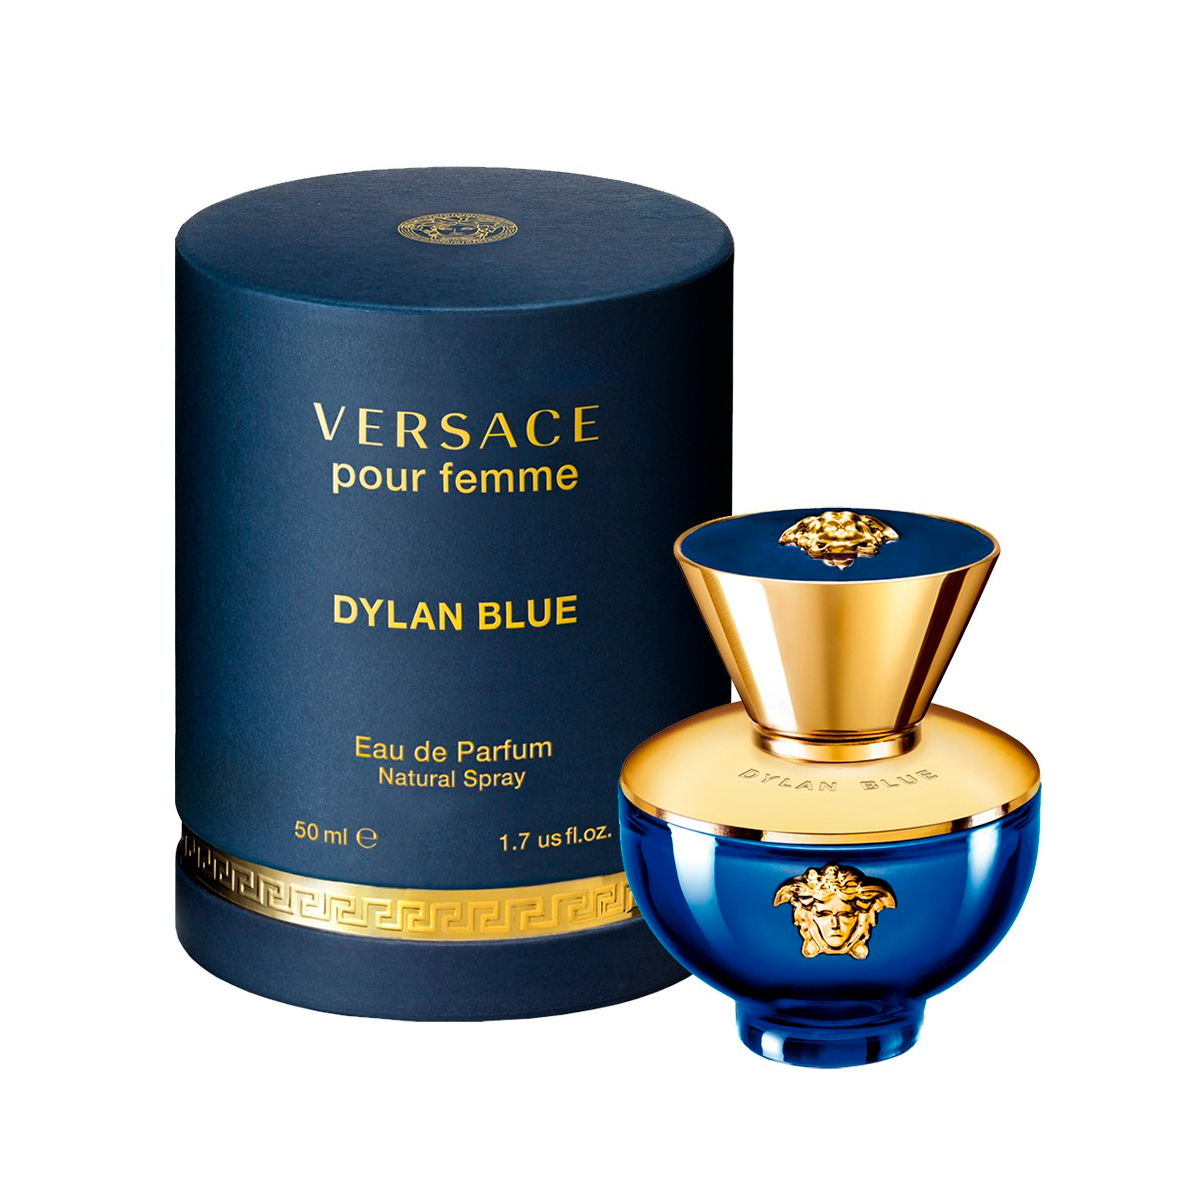 <span data-mce-fragment="1">"Dylan Blue pour Femme is a tribute to femininity. It is a strong, sensuous, refined fragrance created for a woman who knows the power of her sensuality and mind." —Donatella Versace Uniqueness. Strength. Sensuality and Elegance. An alchemy of irresistible notes that dance, arouse, come together and embrace. A refreshing blackcurrant sorbet and granny smith apple combined with a contemporary floral bouquet and woody base notes playfully mix together to create a unique and captivating, sensuous, vibrant movement. • Top notes: blackcurrant, granny smith, clover accord, forget-me-not • Middle notes: eglantine rose, rosyfolia, icy infusion of peach, jasmine • Base notes: styrax, white smooth woods, musk, patchouli coeur</span>